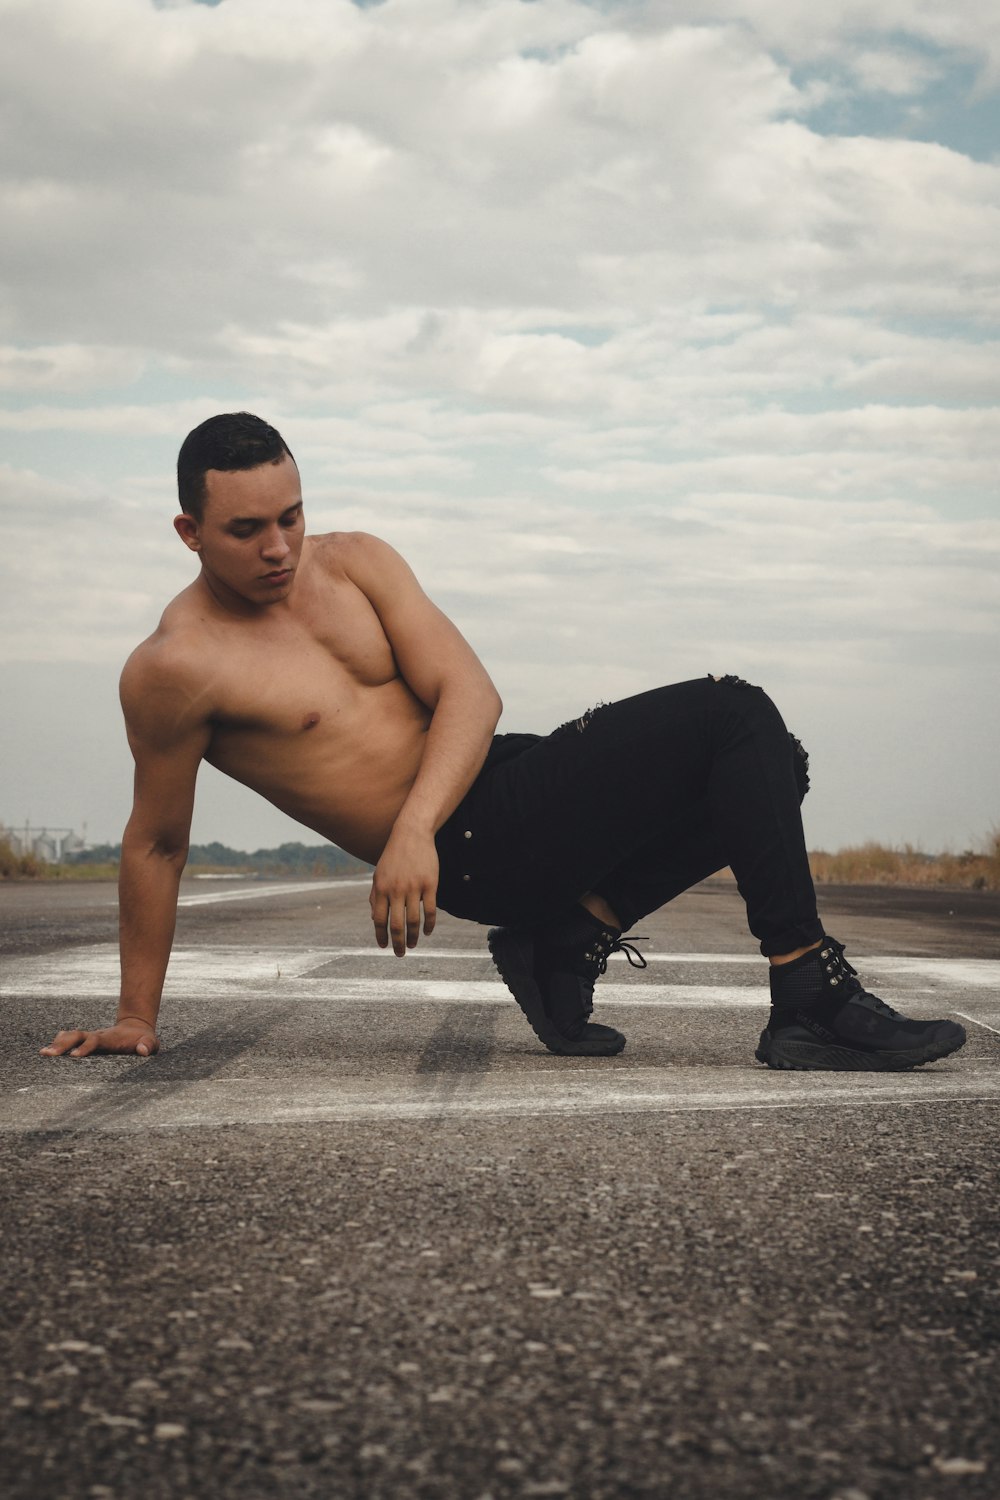 a shirtless man leaning over on a runway